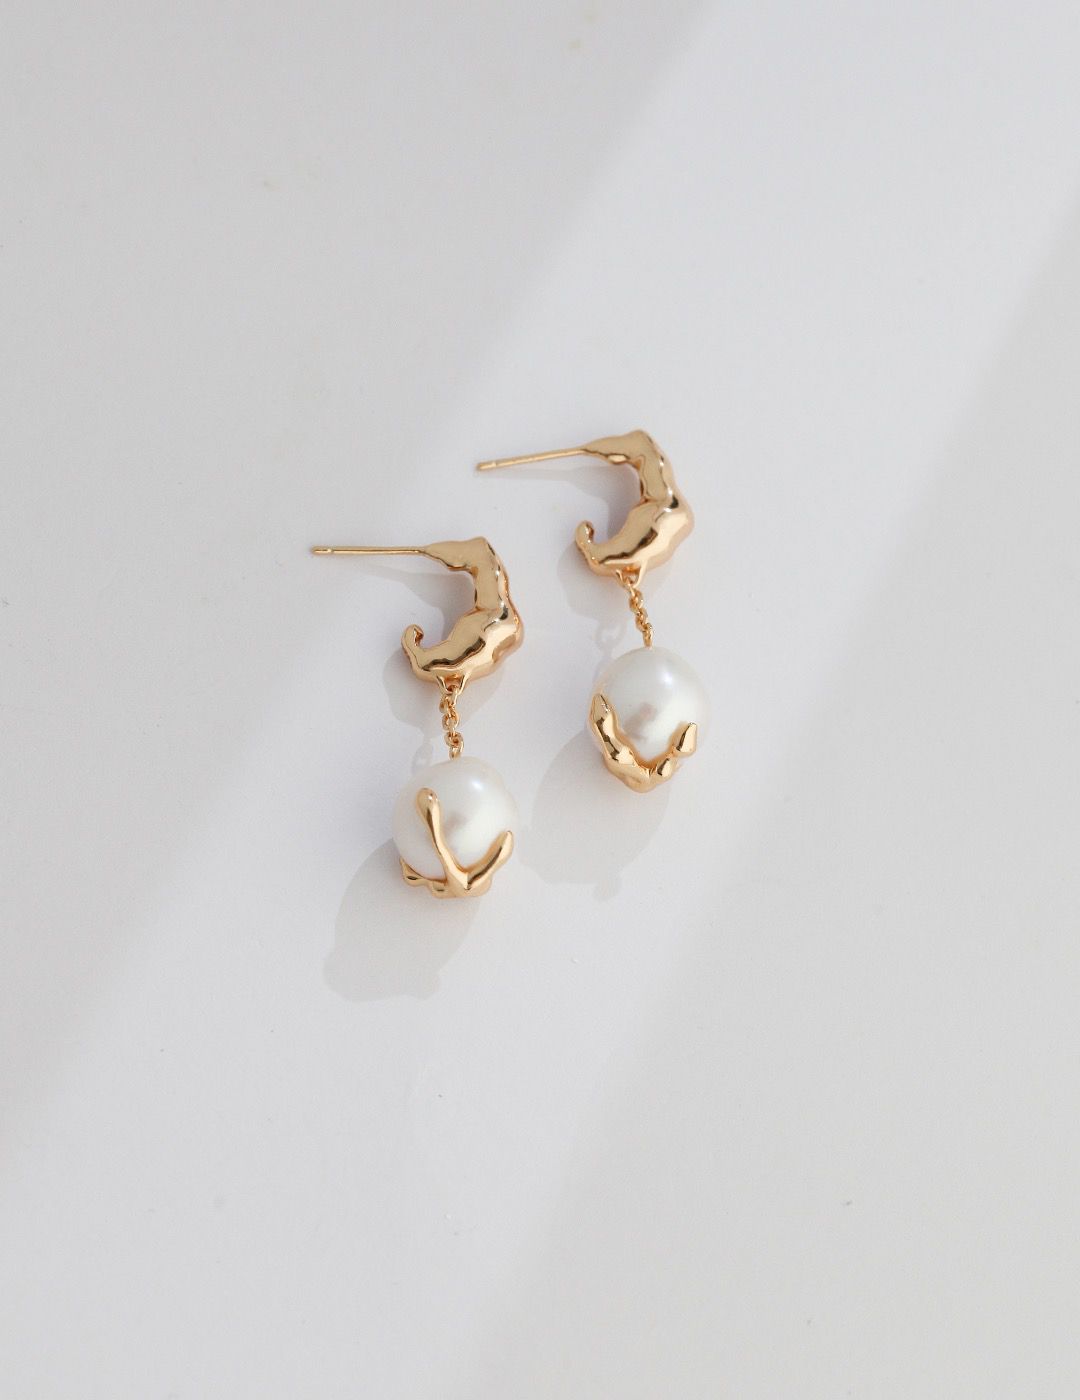 Timeless Pearl Drops" exquisite pearl earrings with lustrous pearls that sway gently. Perfect for any occasion.